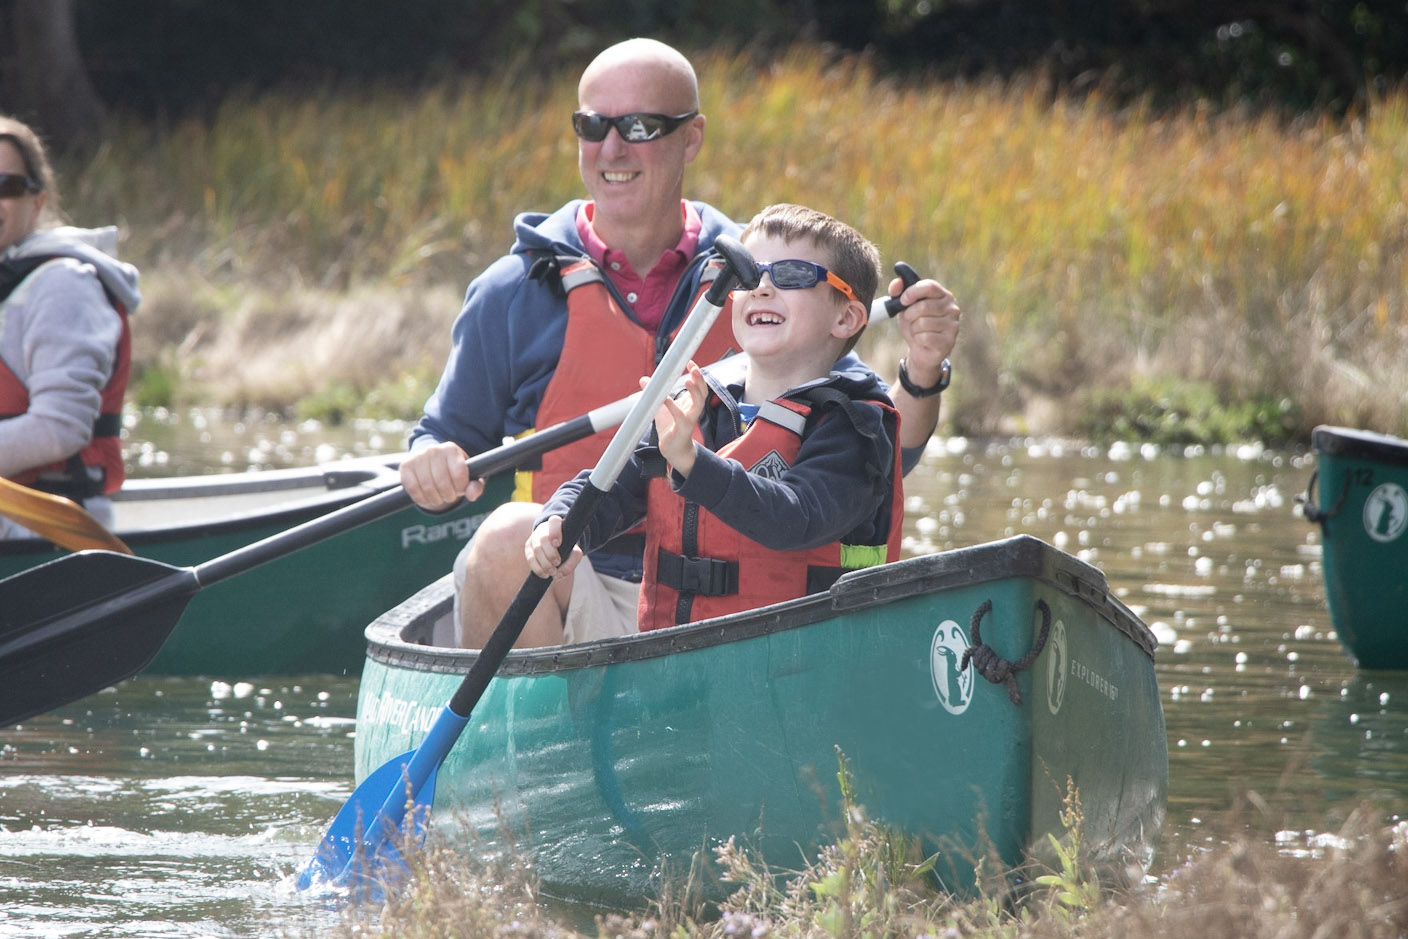 Family Canoeing on the Beaulieu River.